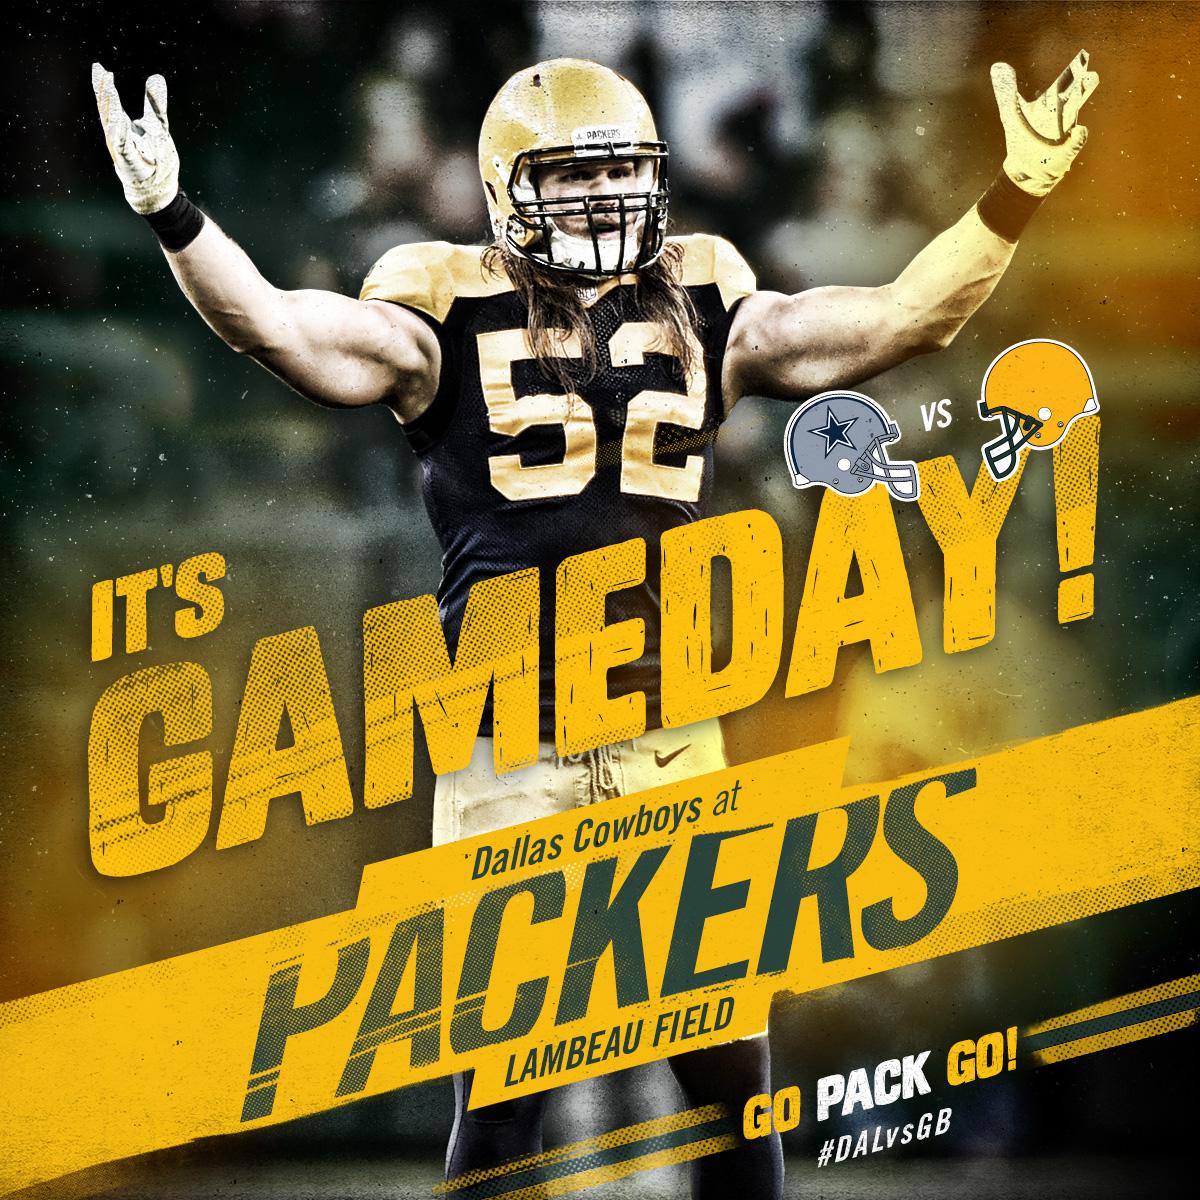 Green Bay Packers on X: 'Rise & shine, #Packers fans, it's GAMEDAY! 